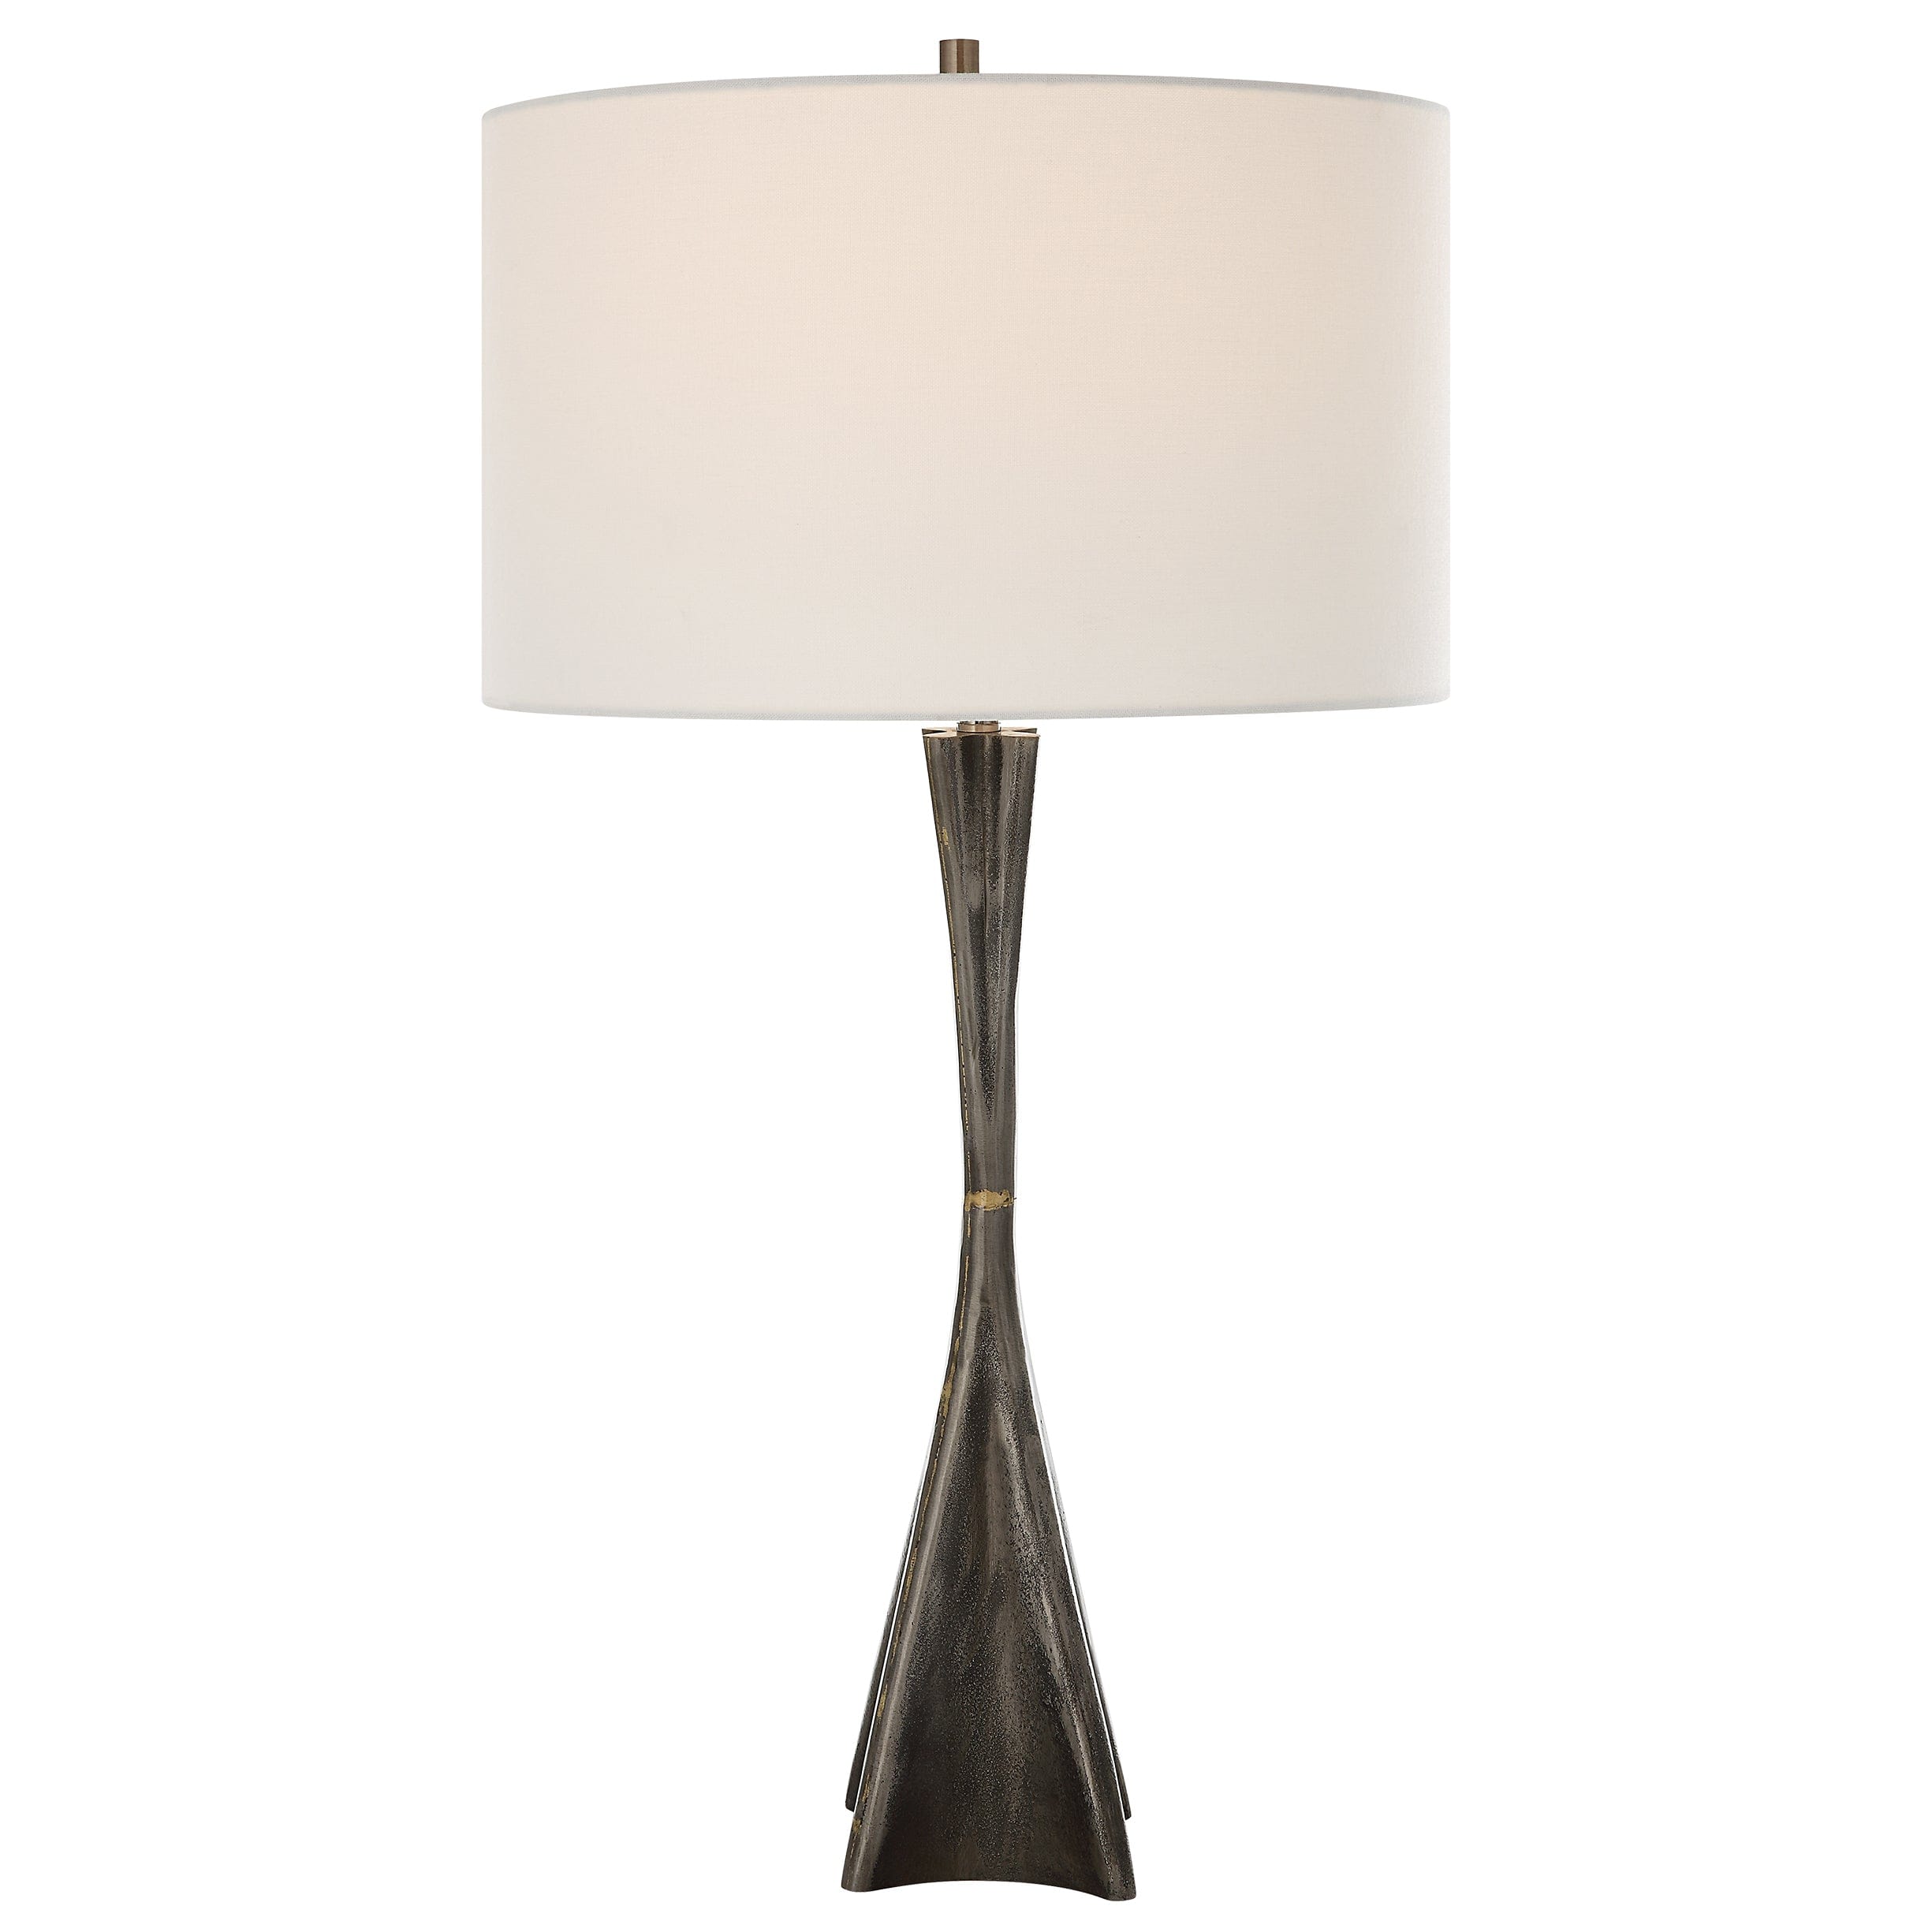 Keiron Industrial Table Lamp Uttermost